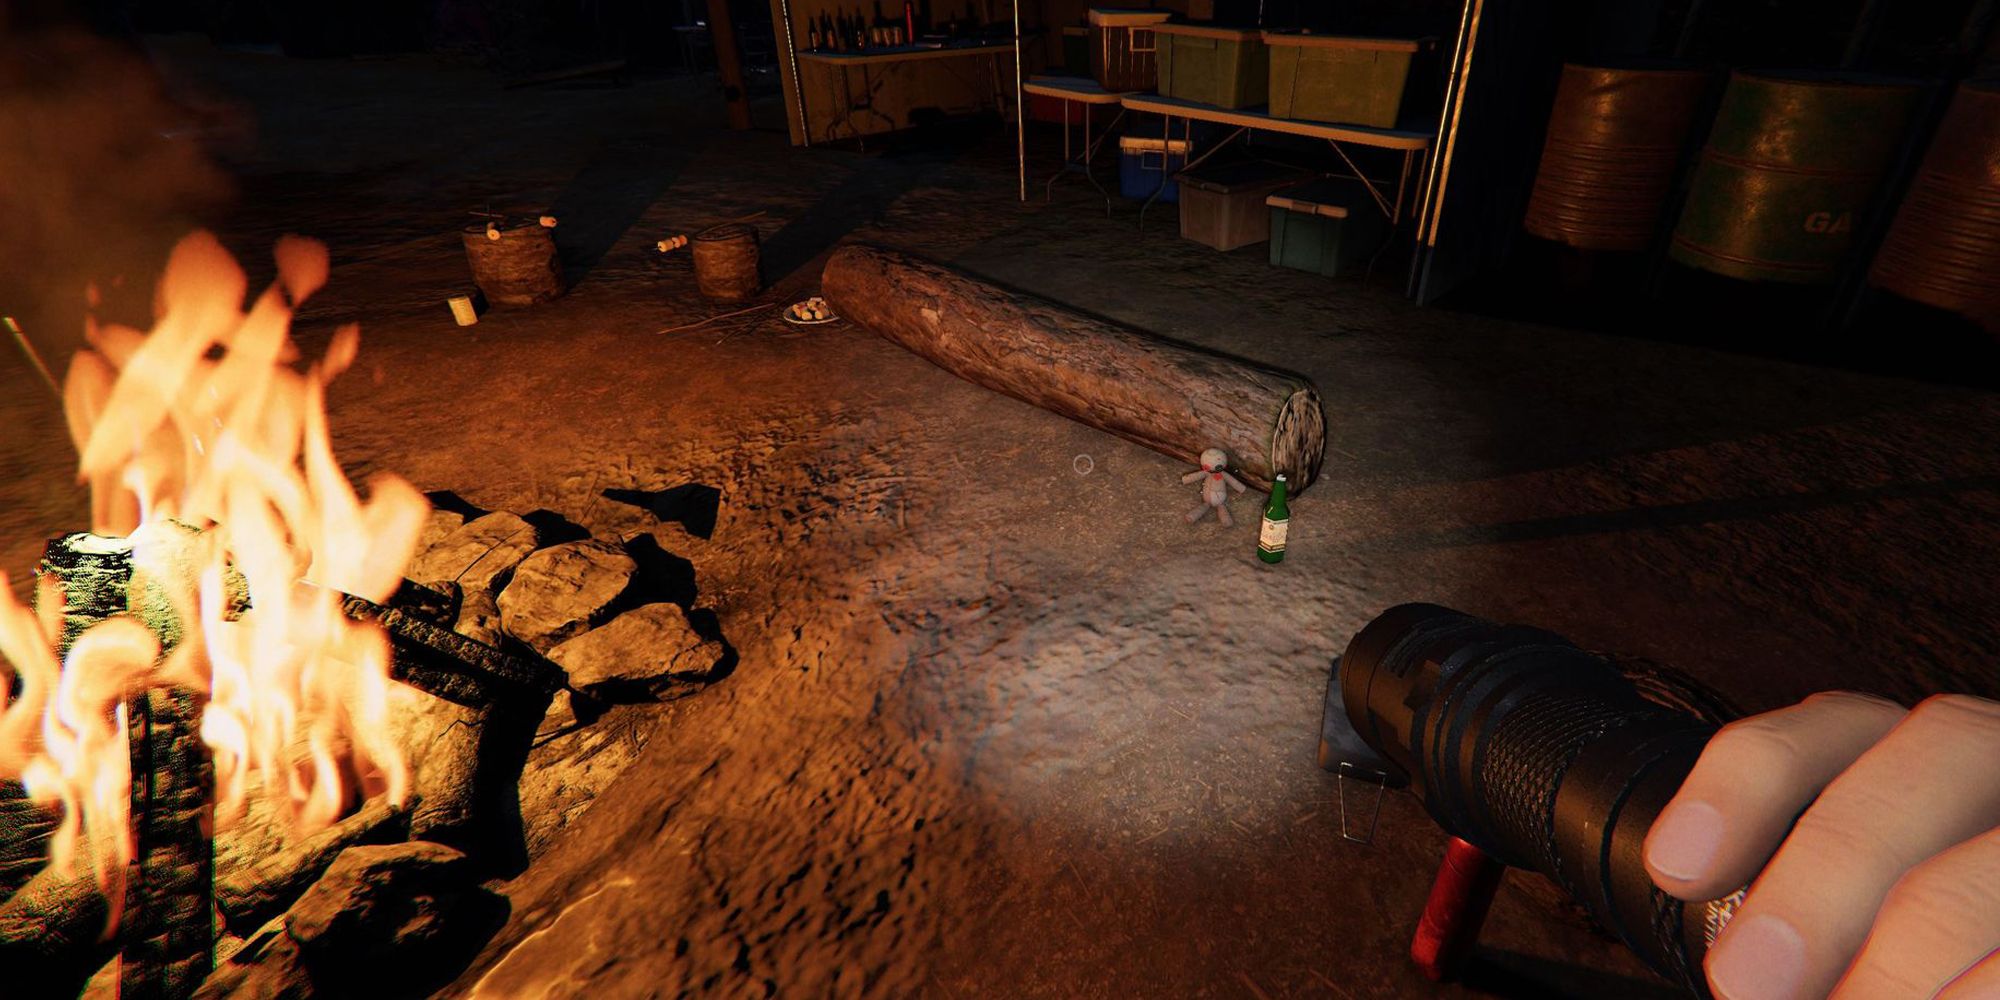 Image depicts a voodoo doll next to a log and green bottle sat near a campfire in Maple Lodge Campsite in Phasmophobia.